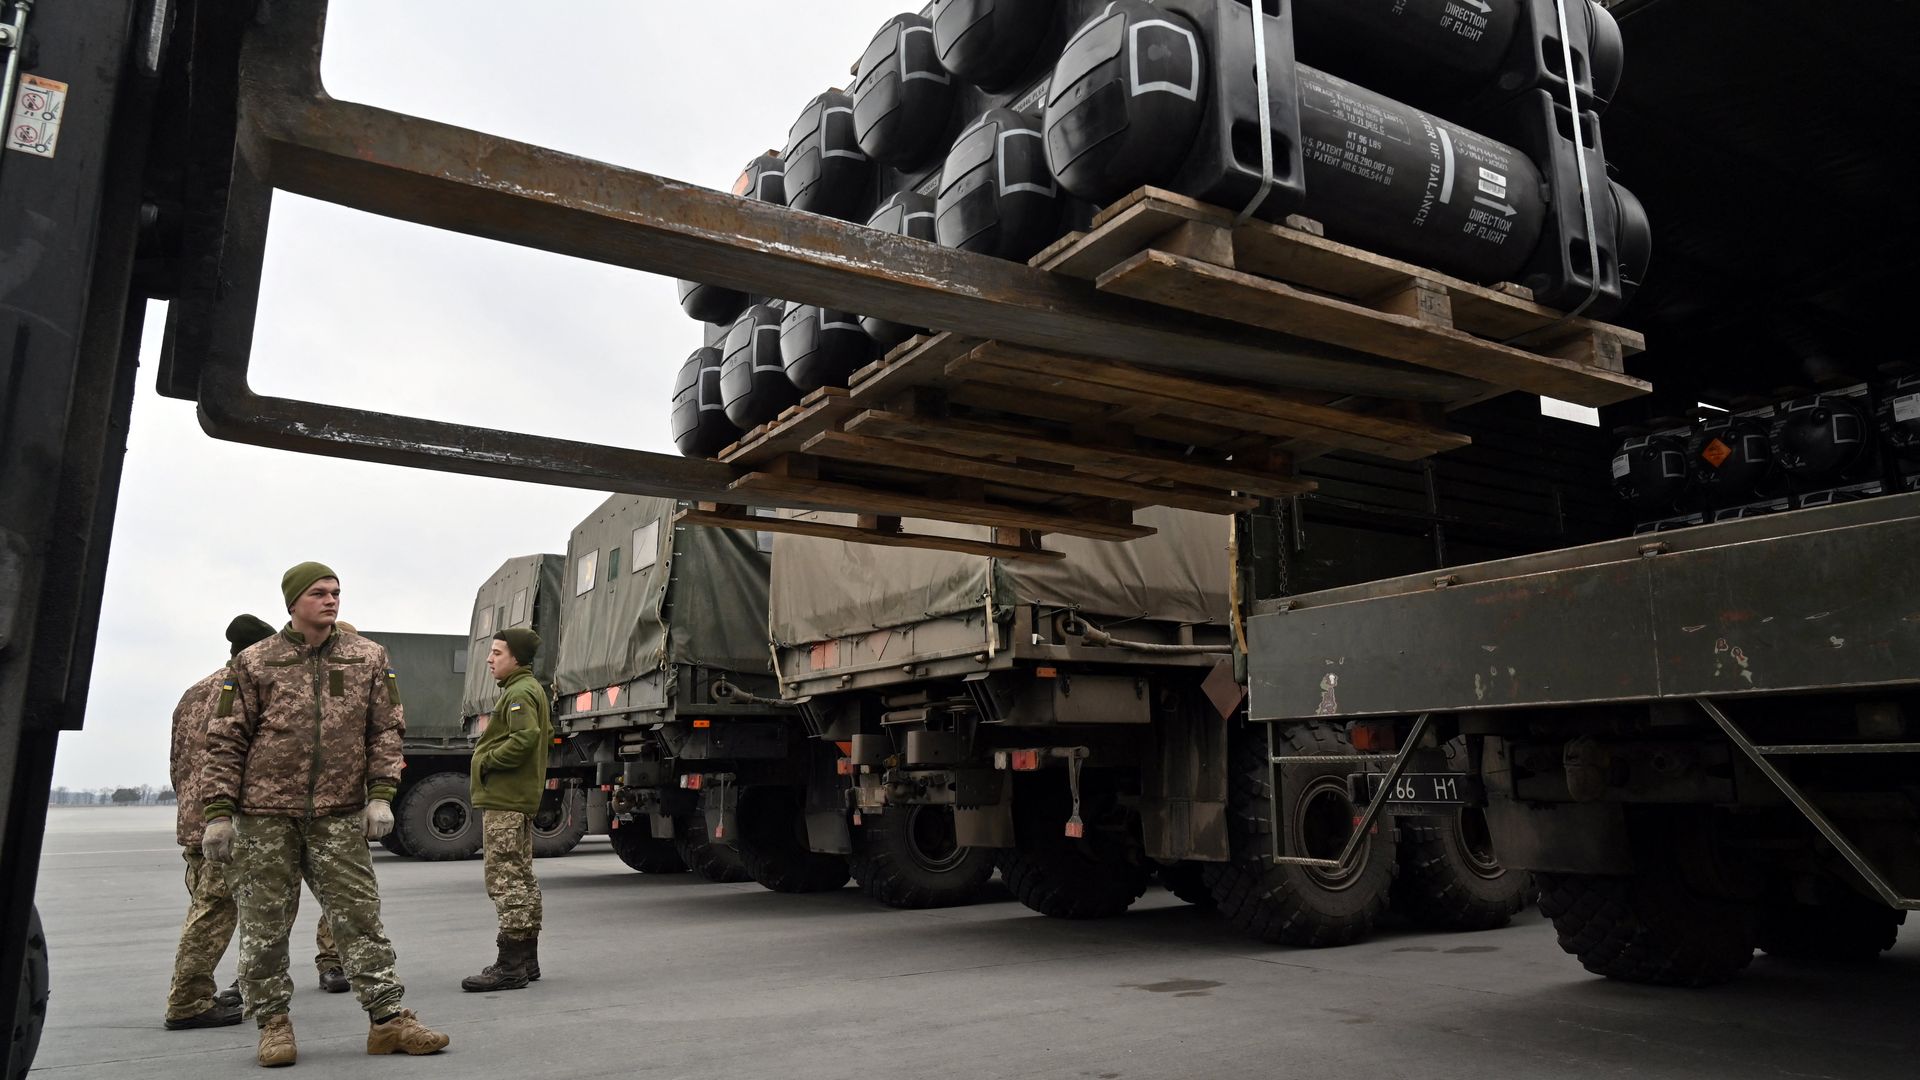 A pallet of Javelin anti-tank missiles is seen being loaded into a truck in Ukraine.